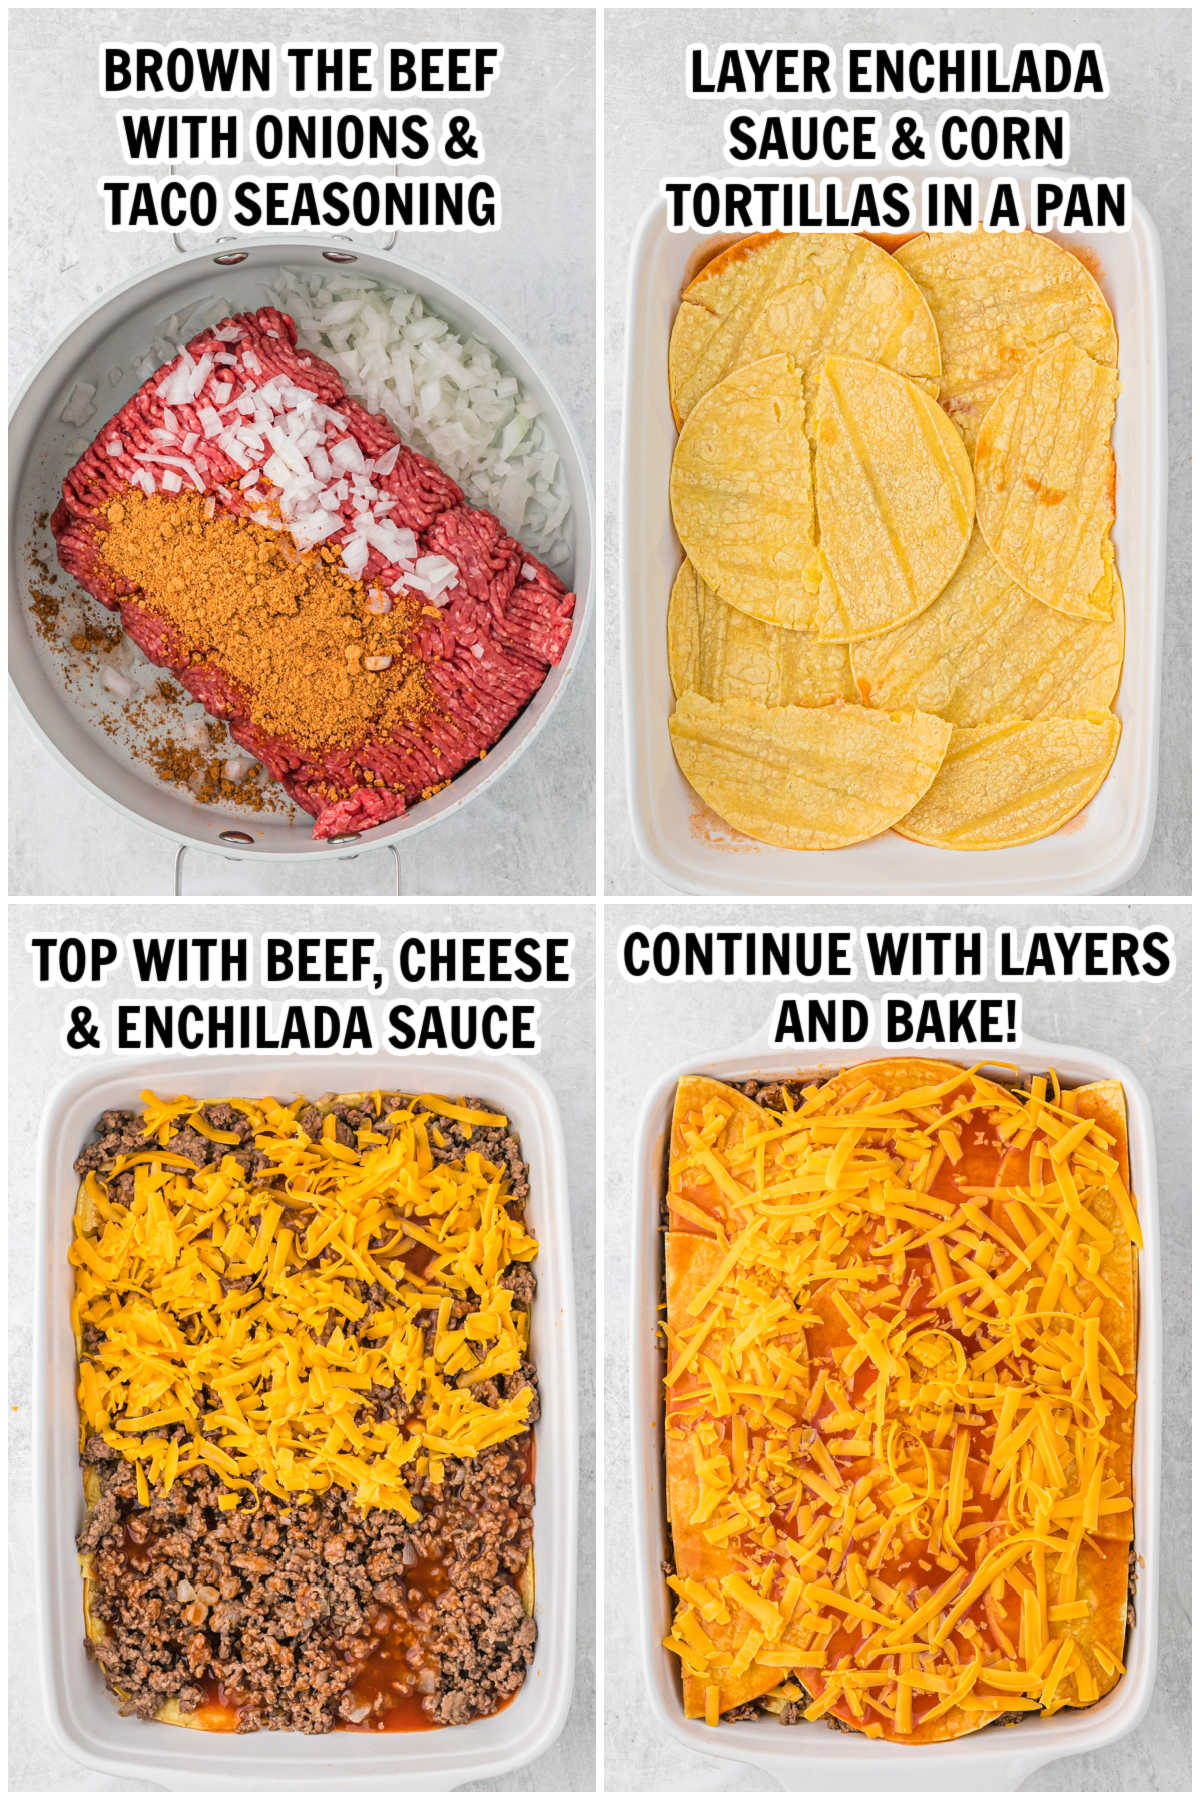 The process of making beef enchilada casserole